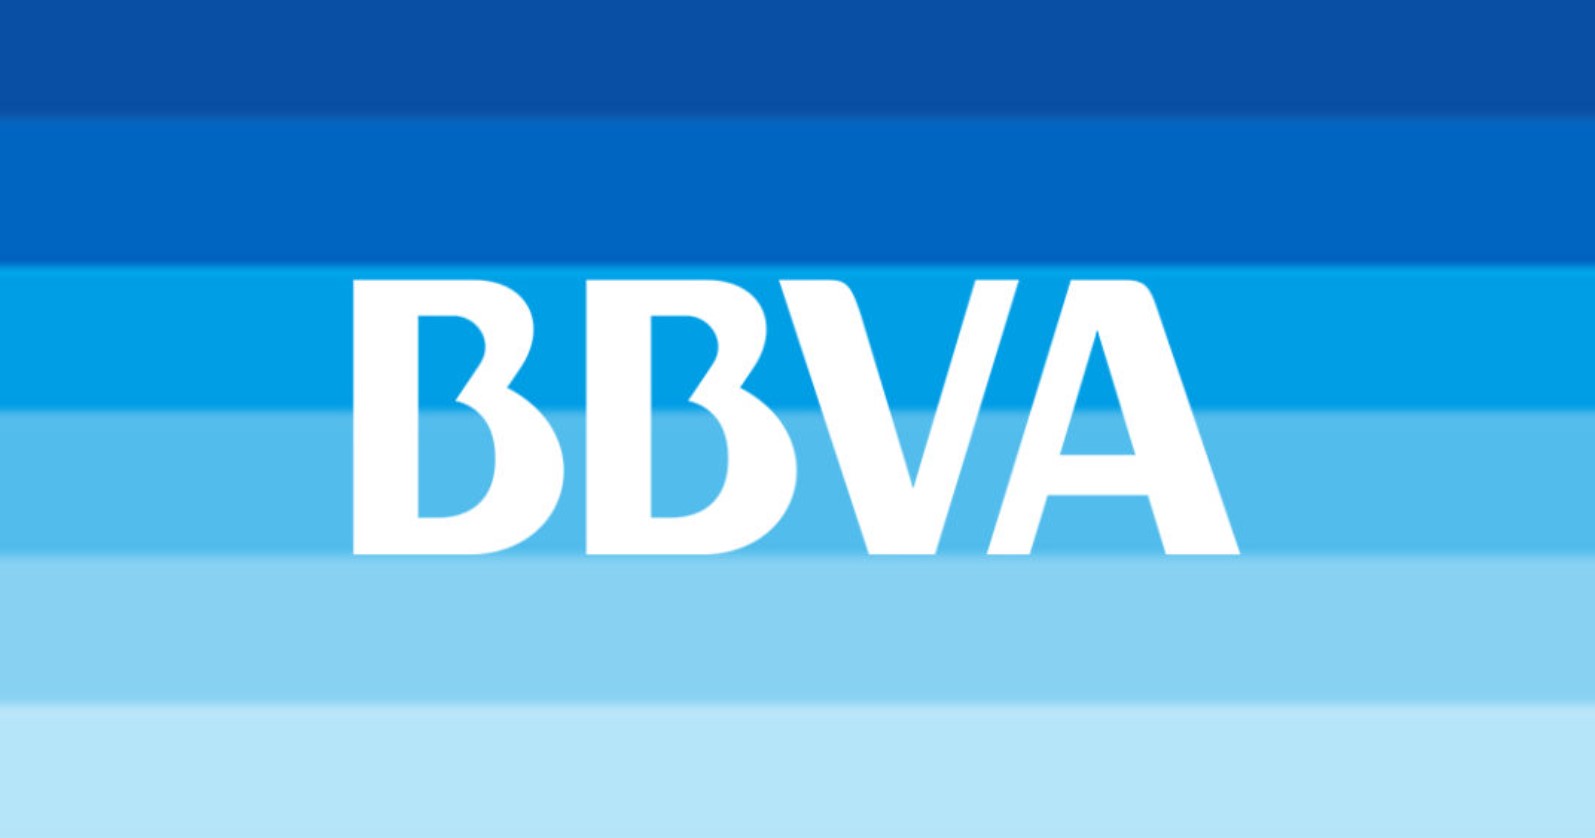 BBVA Customer Service, Telephone Number, Contact And Email